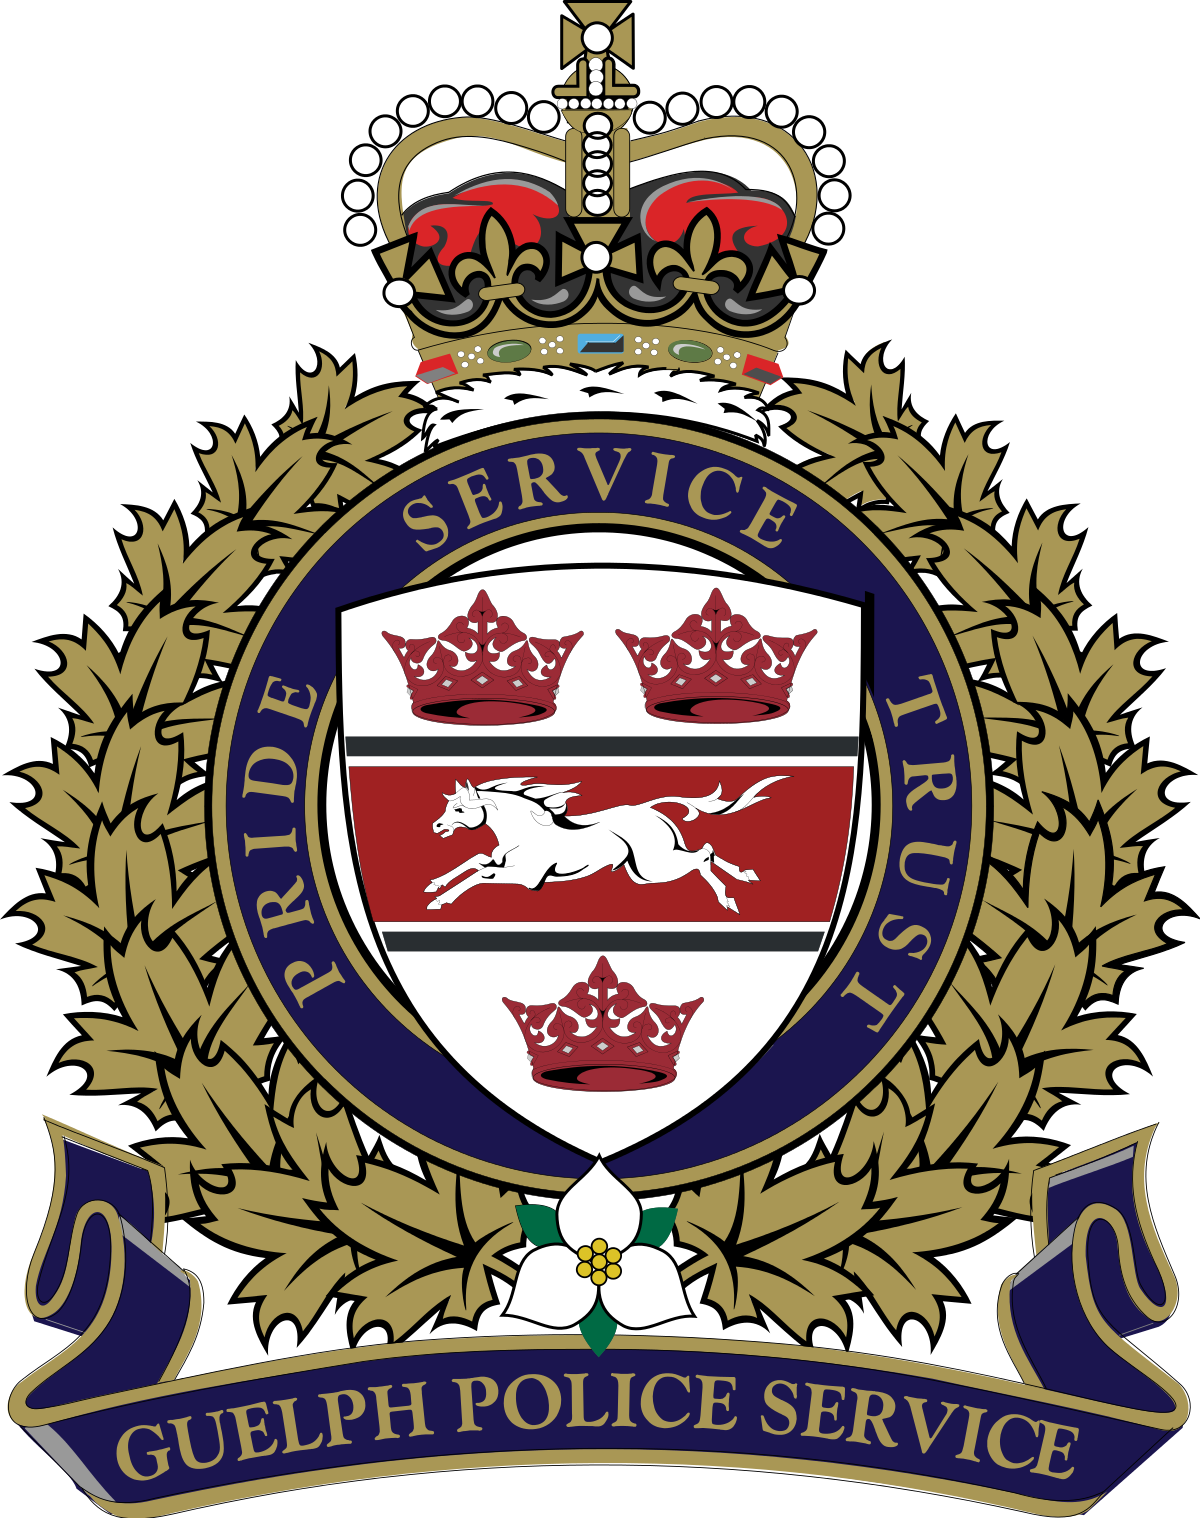 Guelph police service wikipedia. Emergency clipart policing